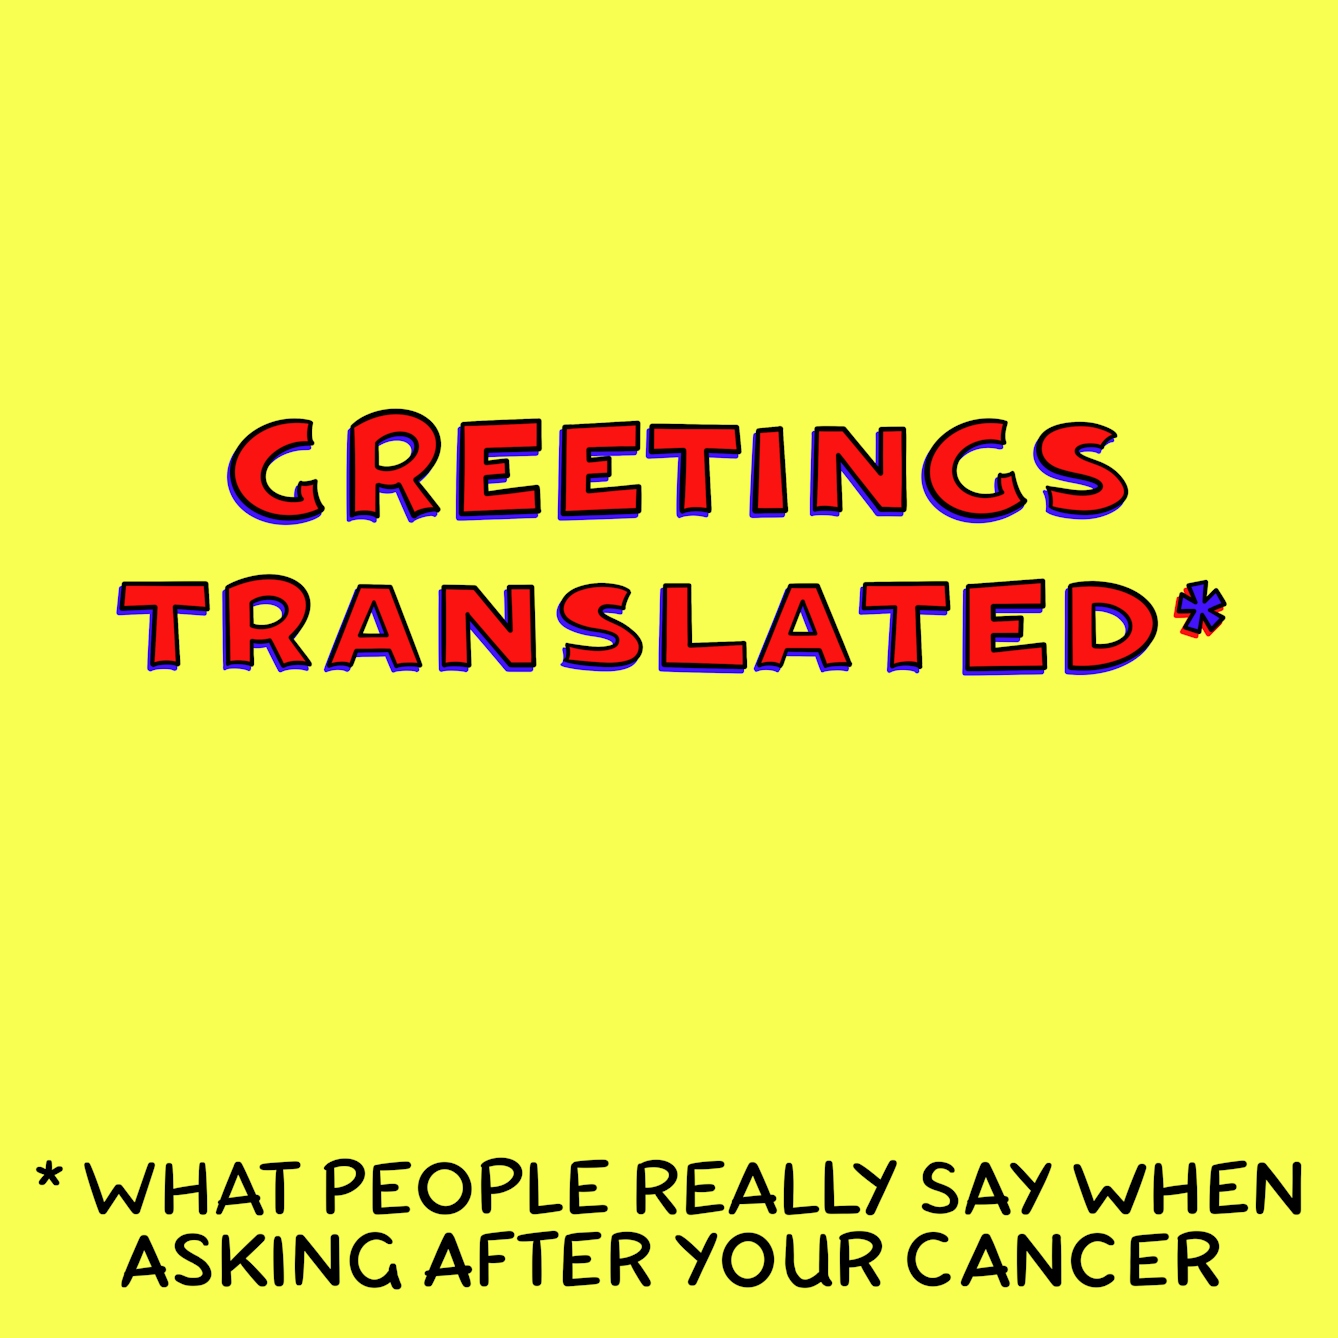 Panel 1 of a six-panel comic drawn digitally: Bold red title text on a yellow background reads "Greetings Translated*" the asterisk below explains "What people really say when asking after your cancer"